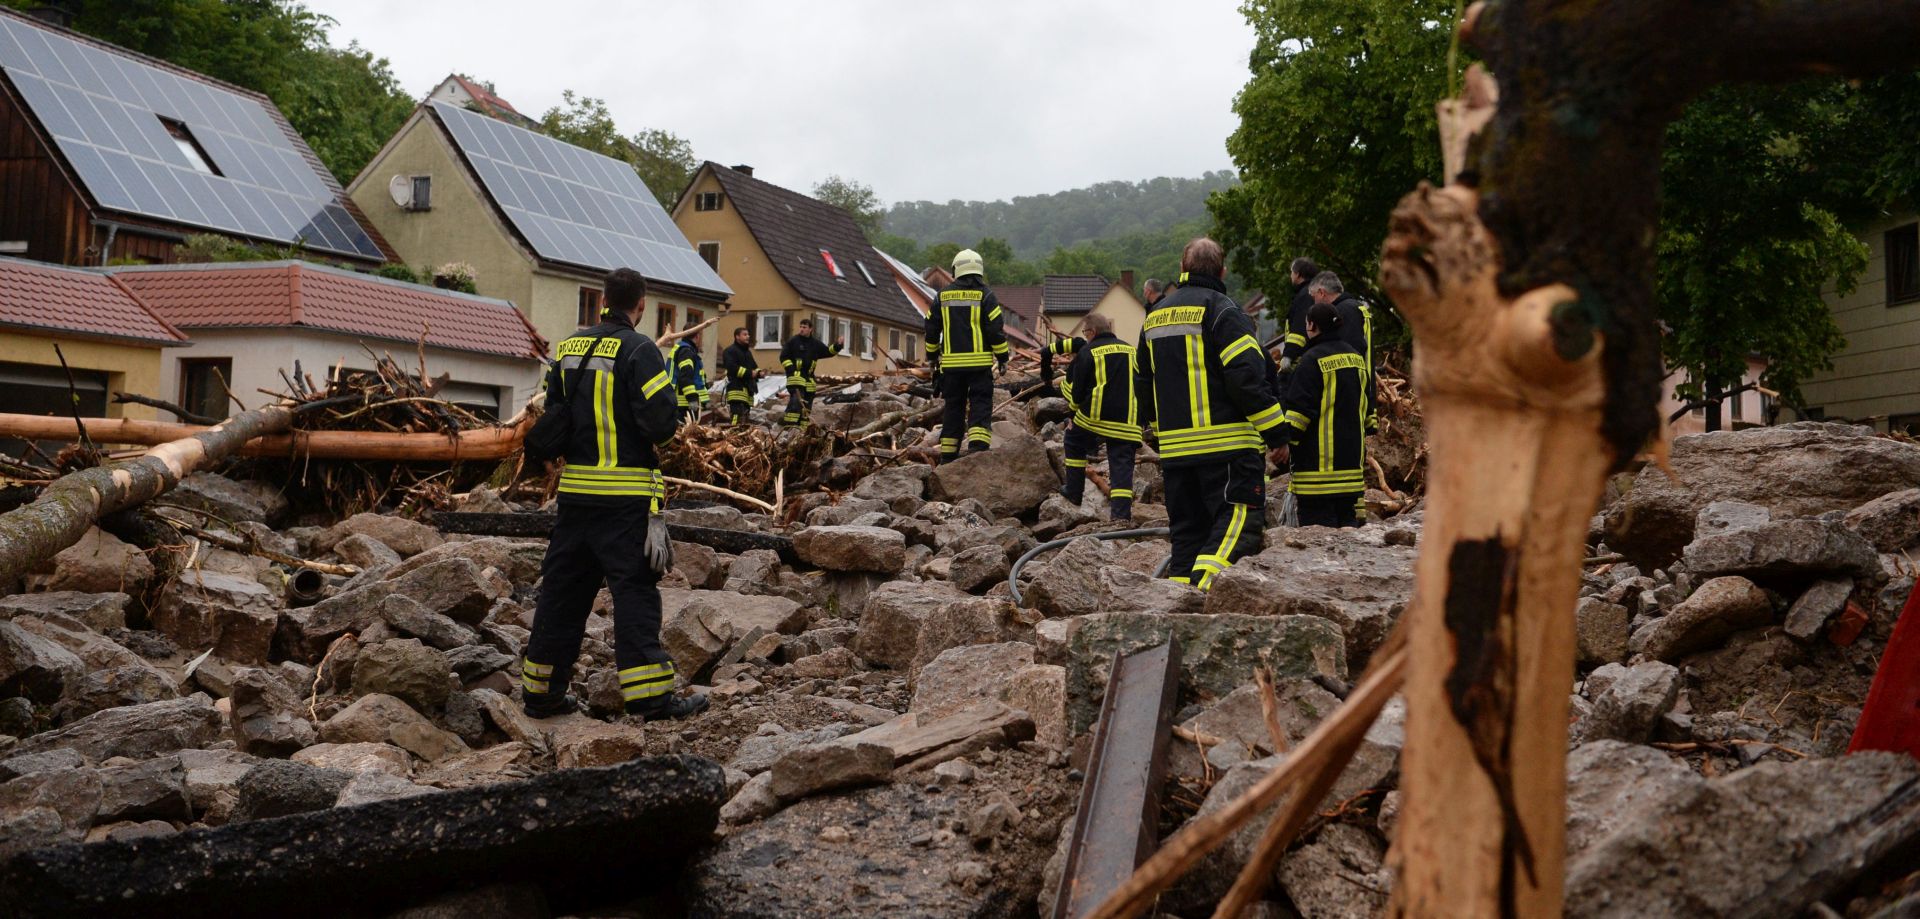 epa05337007 A general view shows rubble and debris on a road in Braunsbach, Germany, 30 May 2016. Two small streams burst their banks after heavy rain, flooding and damaging houses, roads and cars.  EPA/FRANZISKA KRAUFMANN